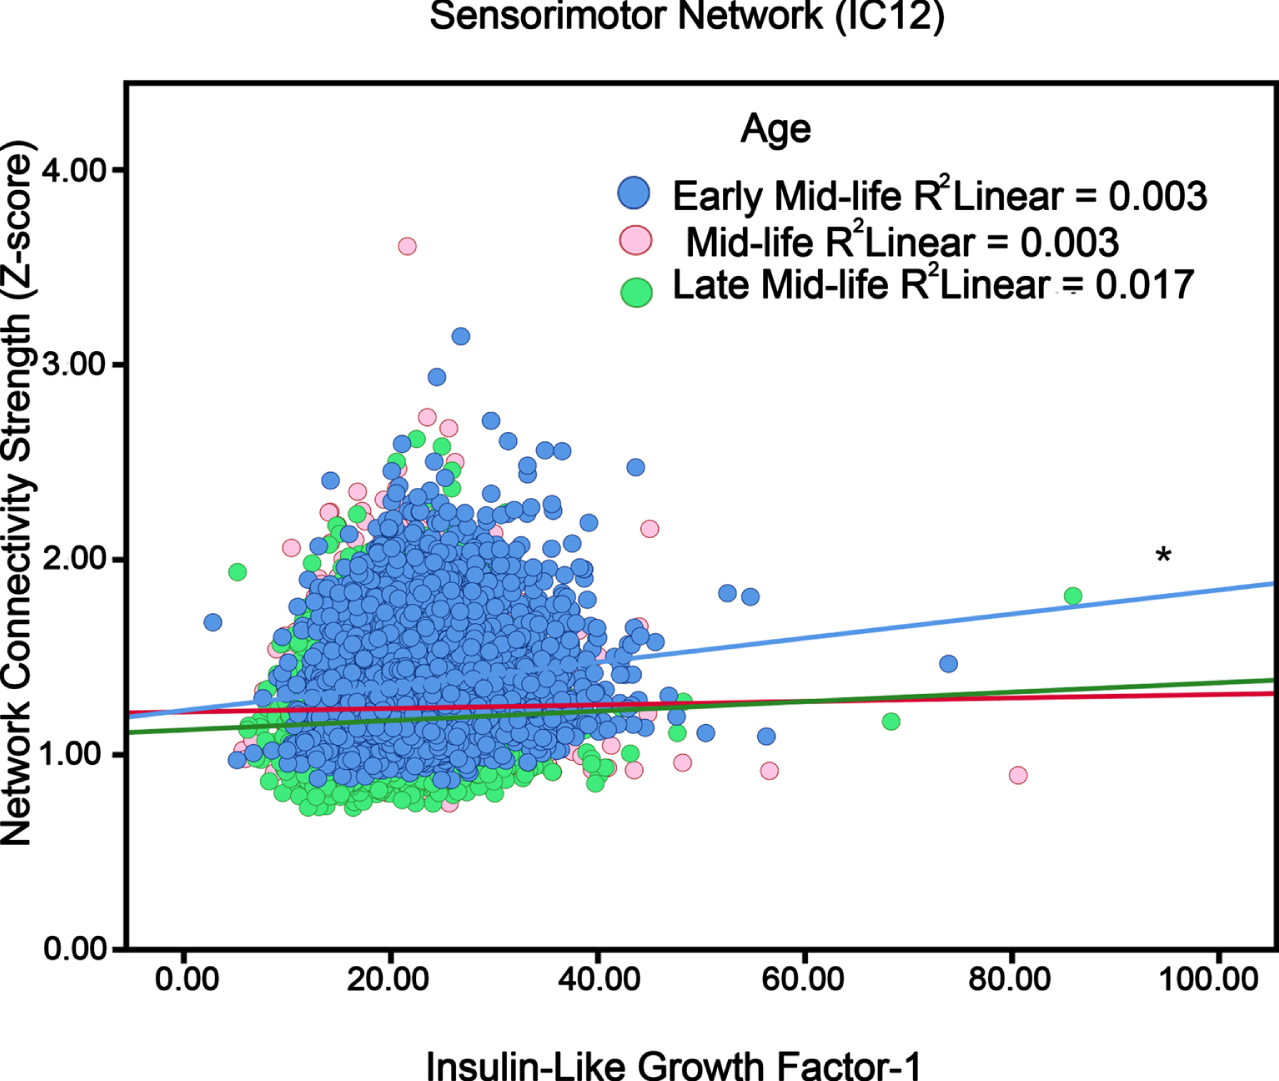 The association between IGF-1 levels and localized networks like Sensorimotor (i.e., neural network activity) in adults in different ages (“Early Mid- life”, “Mid-life”, and “Late Mid-life”). Blue circles, red circle and green circles respectively represent early mid-life (40–52 years), mid-life (52–59 years) and later-life (≥59 years) participants. *p < 0.05.